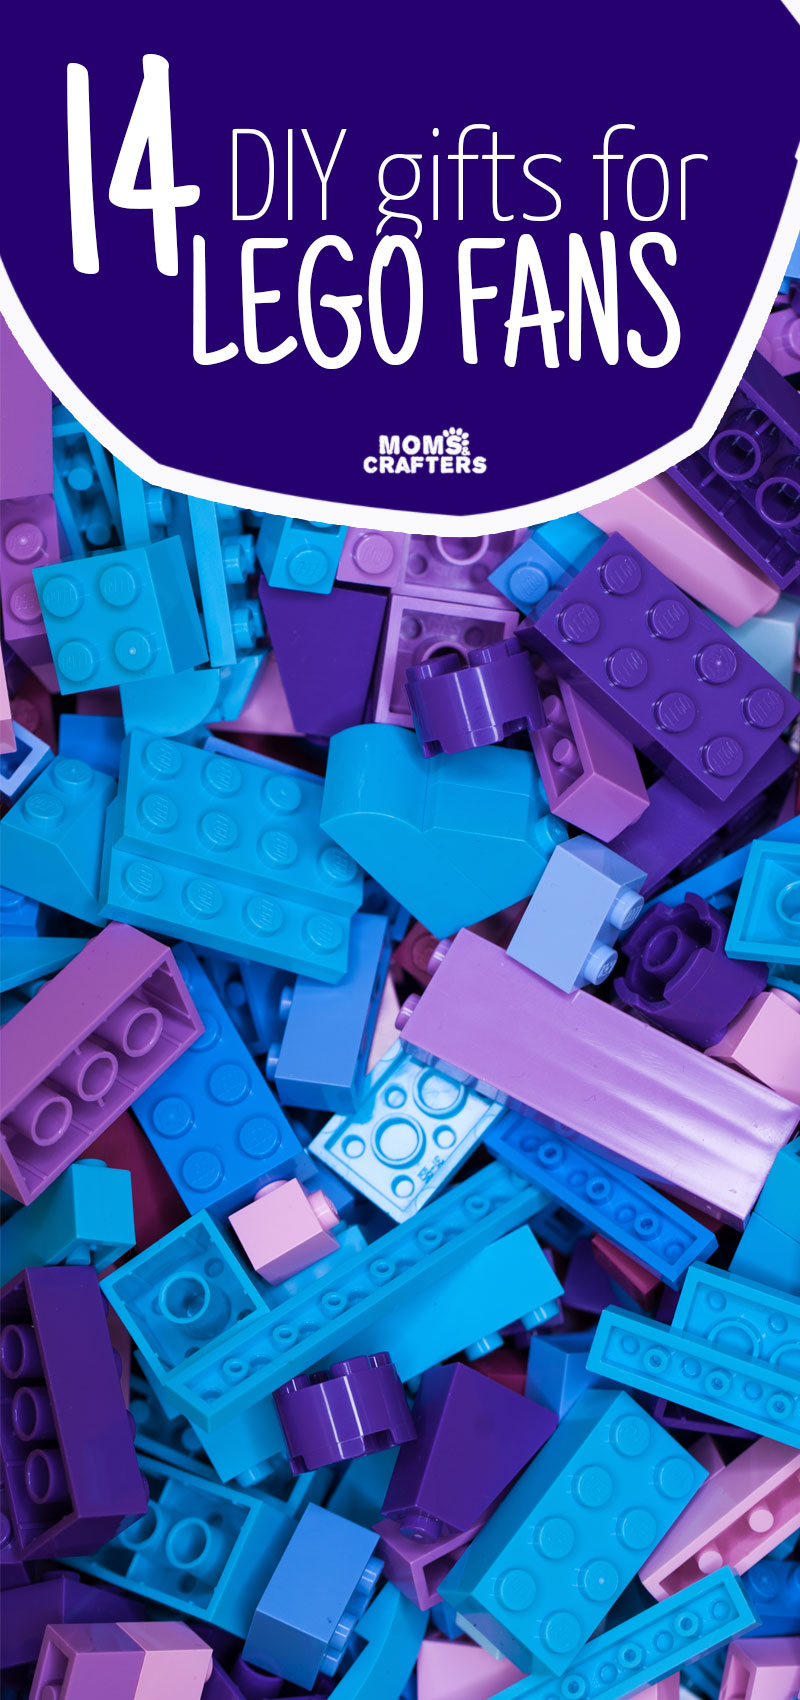 Looking for some cool LEGO gifts for boys and girls? These DIY gift ideas are easy to make!